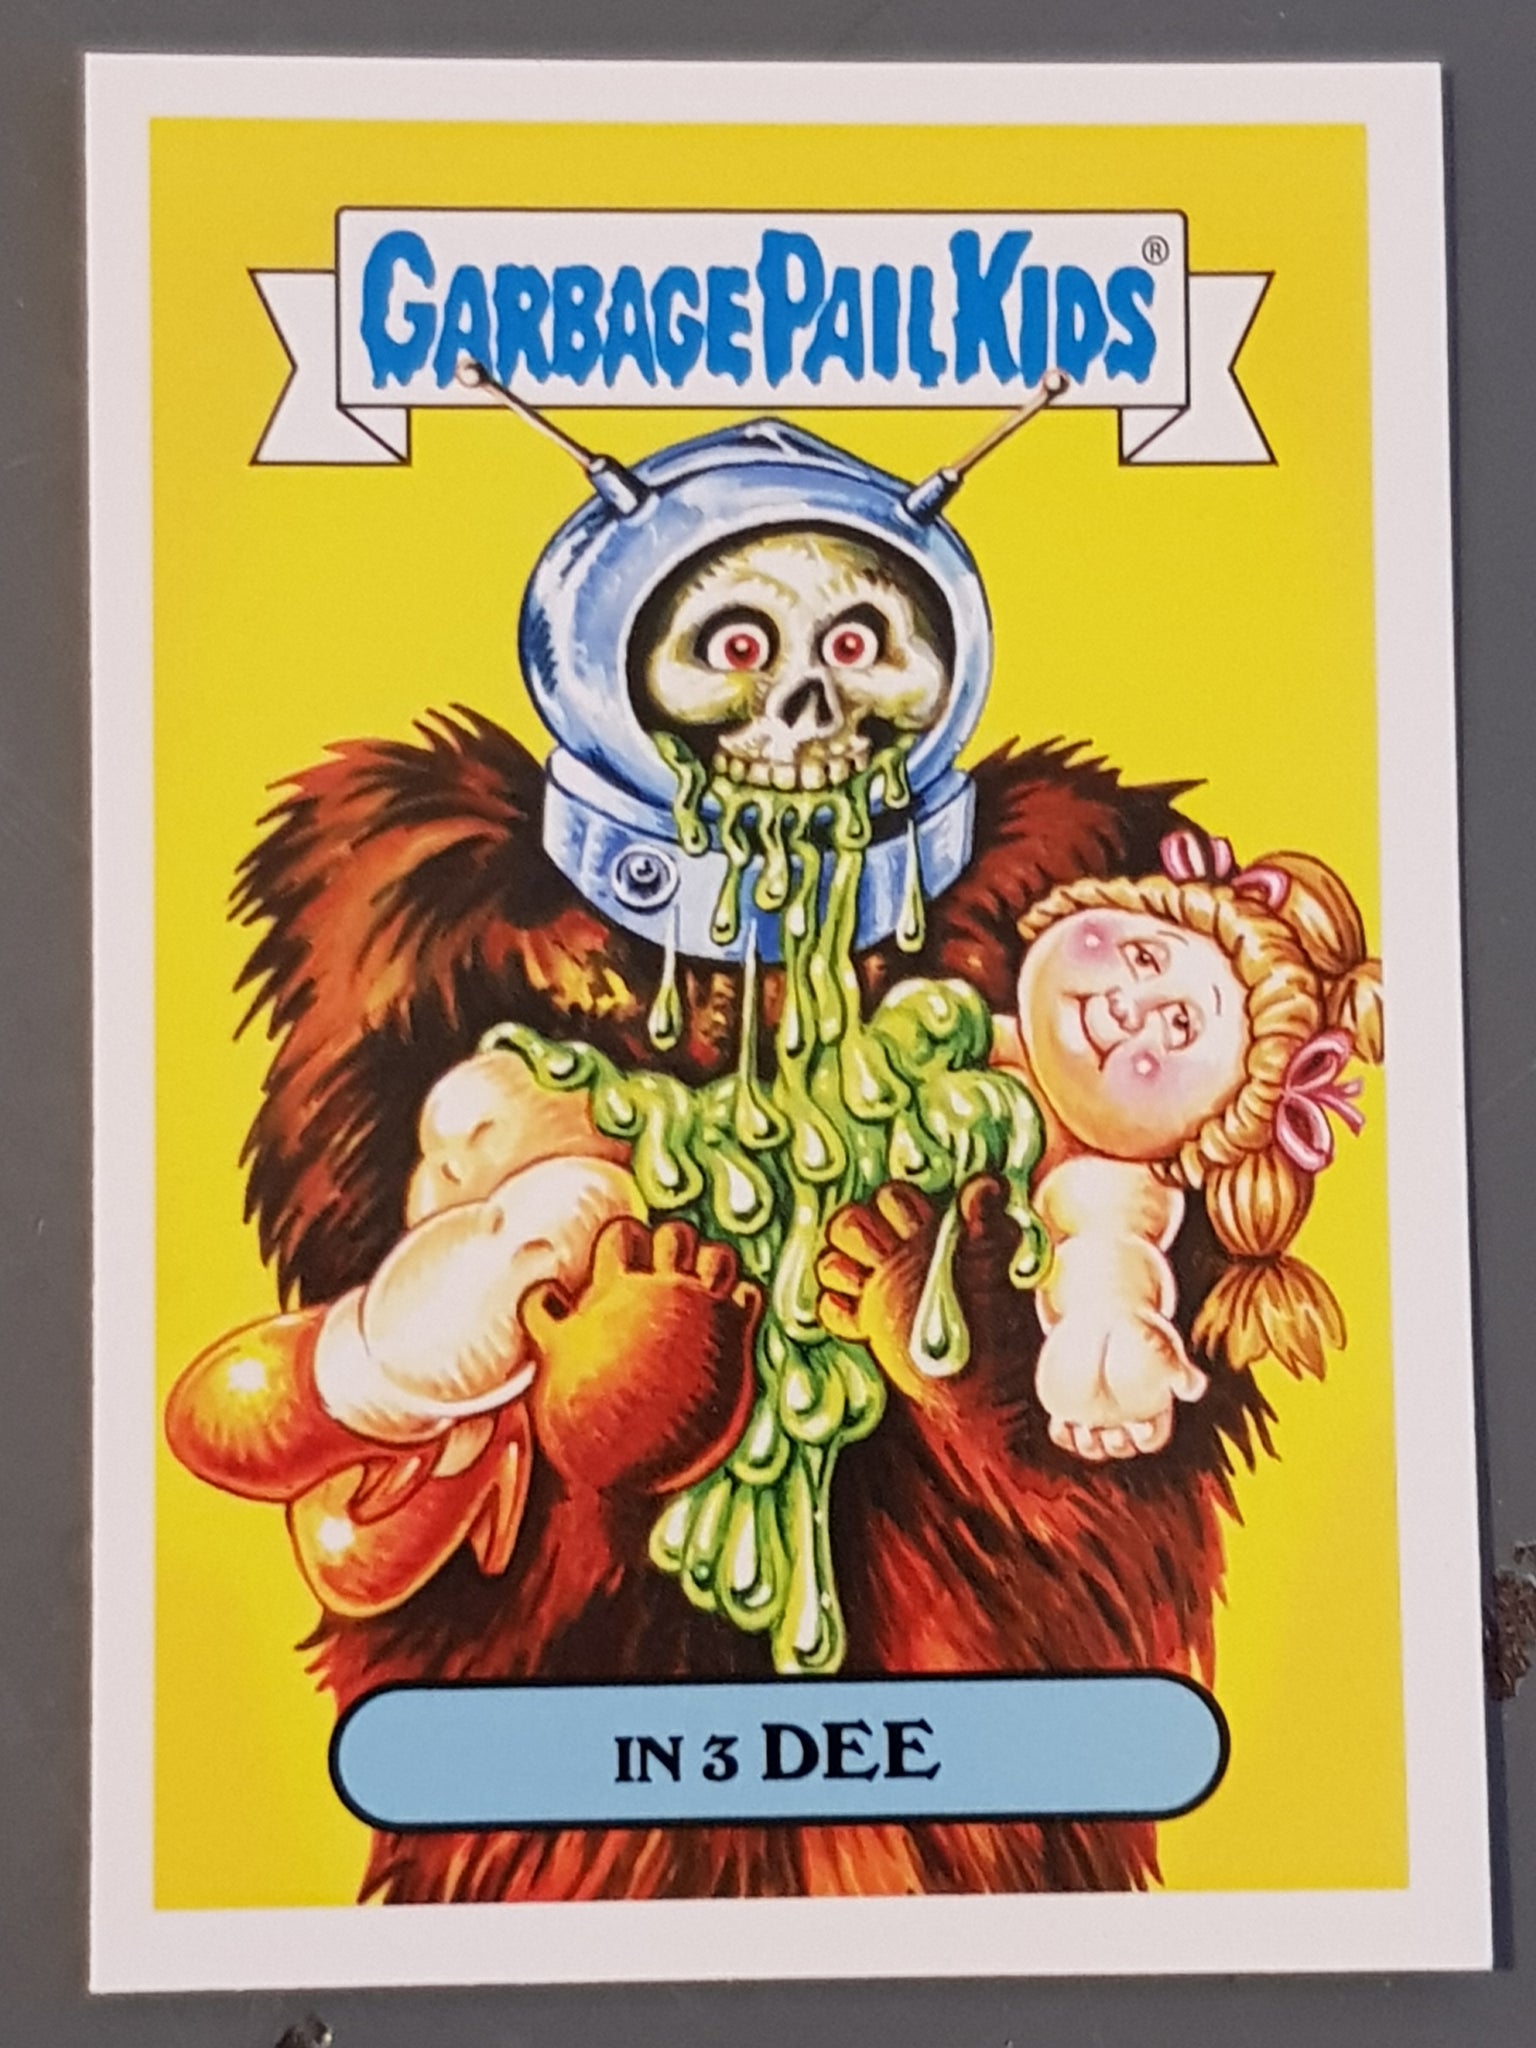 Garbage Pail Kids Oh the Horror-Ible Retro Sci-Fi #13b - In 3 Dee Trading Card